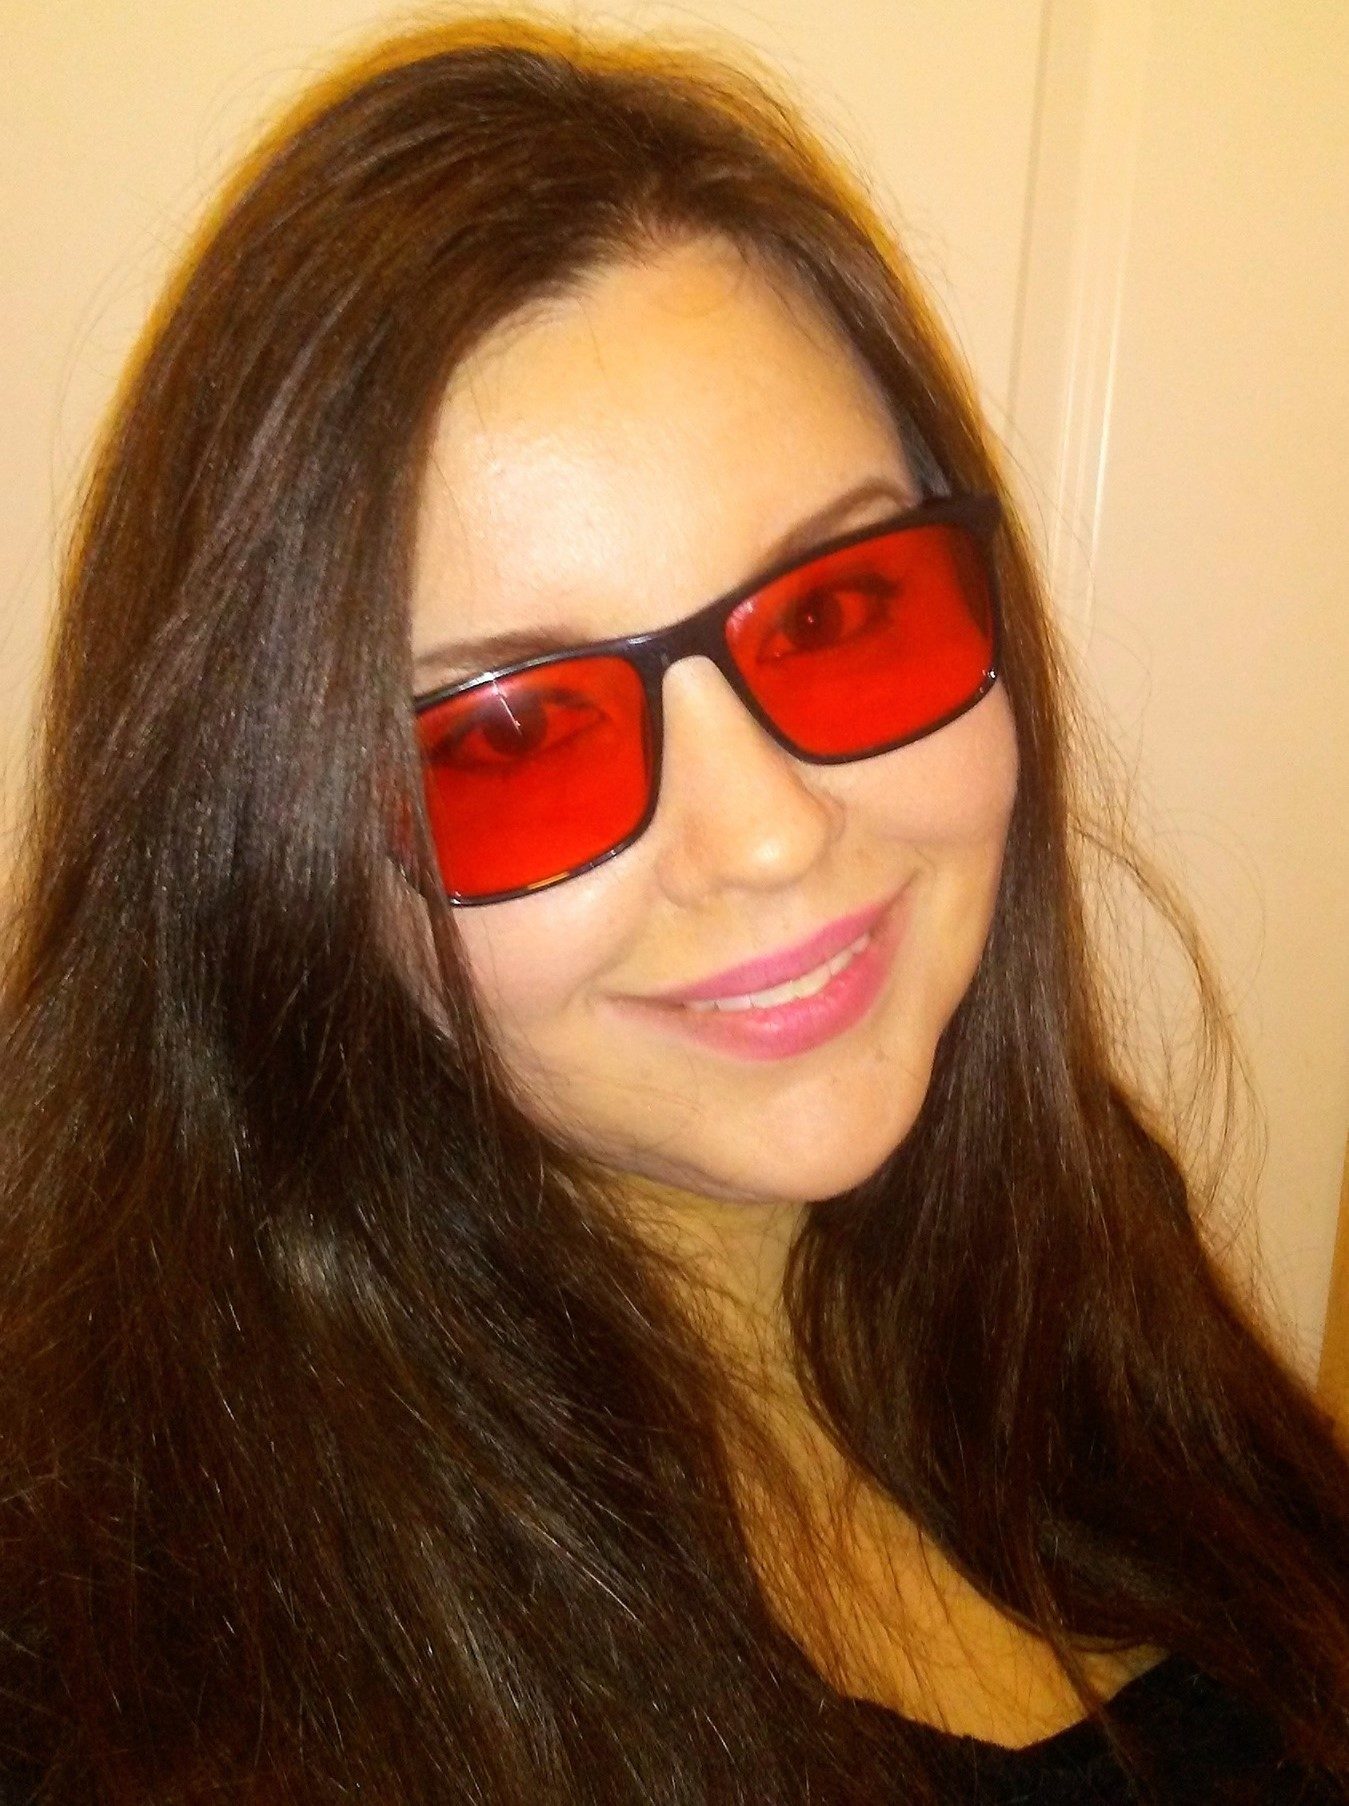 a picture of Charity Anderson, a smiling woman with long dark hair who is also wearing blue-light-blocking prescription glasses to avoid a migraine